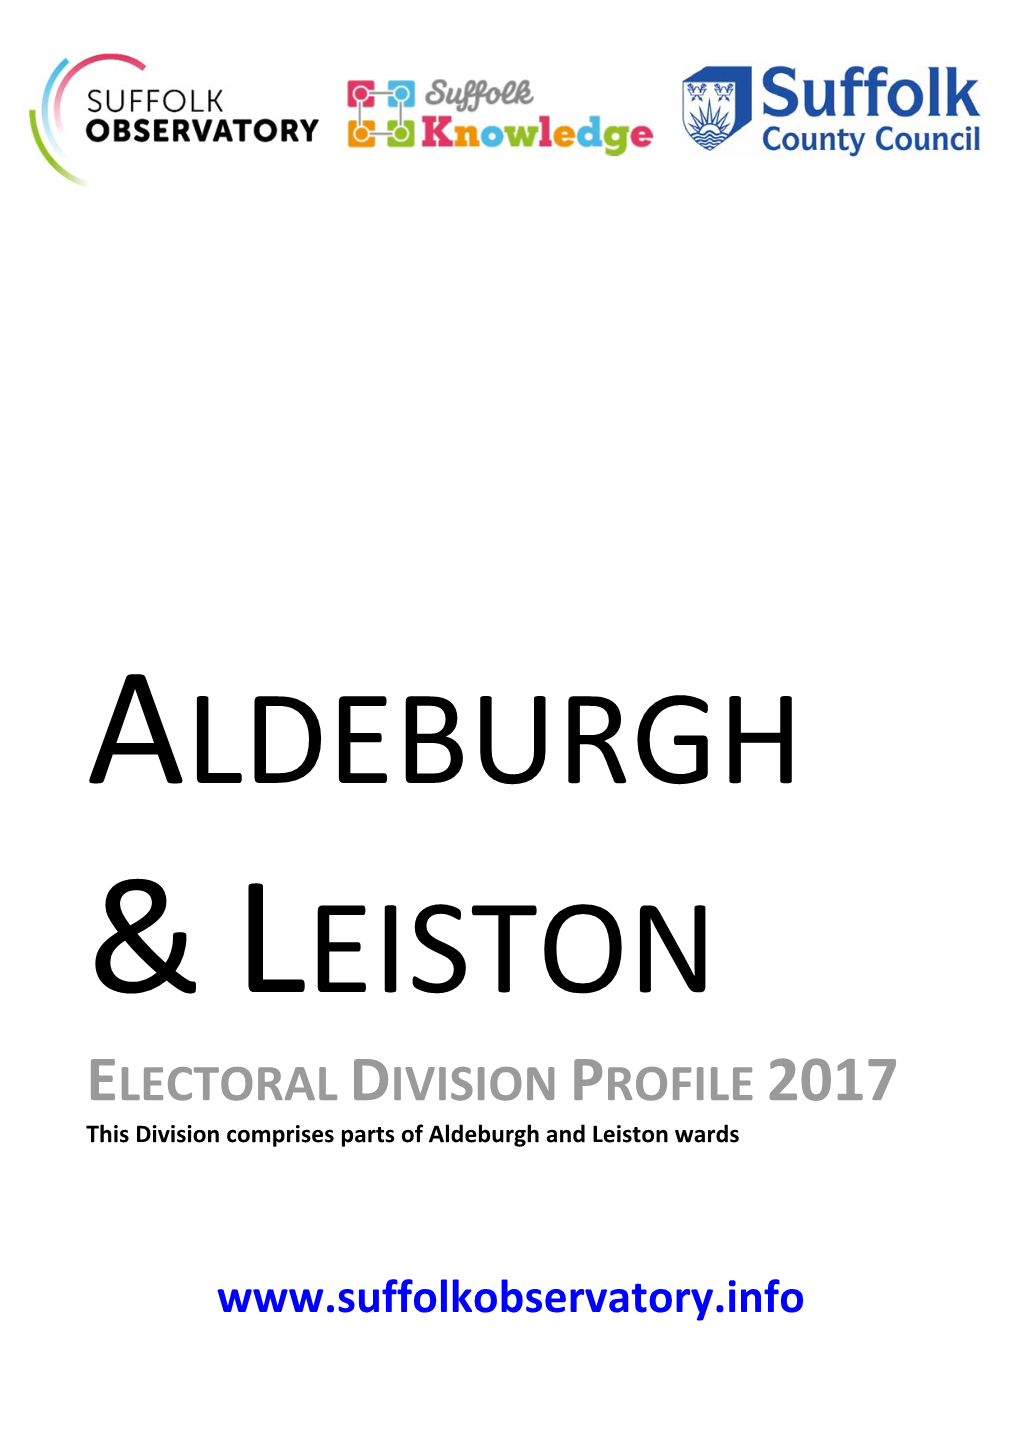 ELECTORAL DIVISION PROFILE 2017 This Division Comprises Parts of Aldeburgh and Leiston Wards